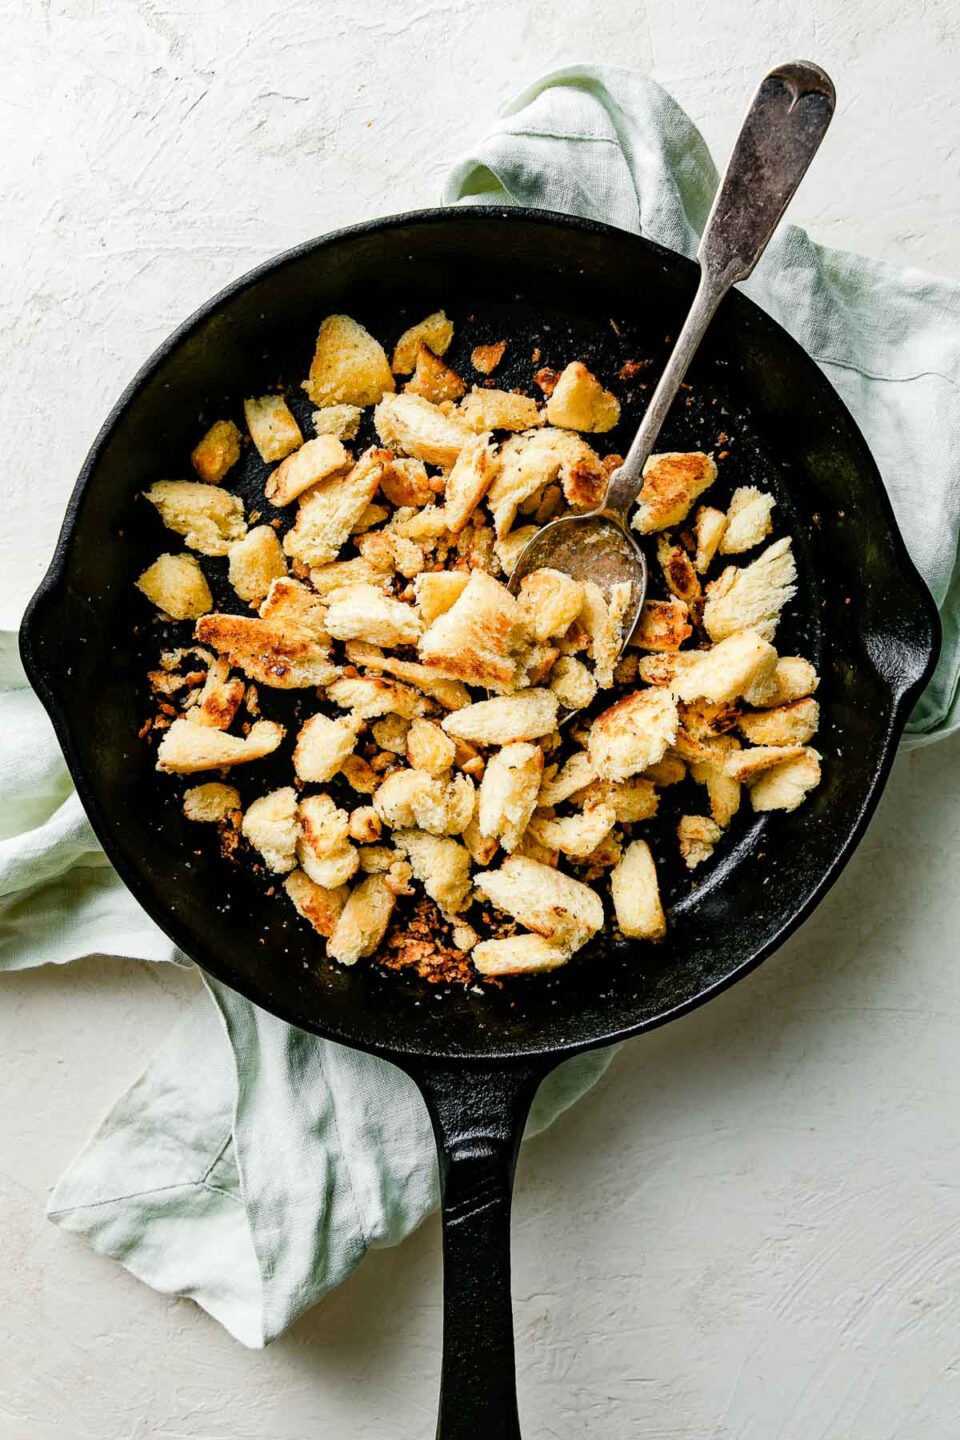 An overhead shot of a black skillet with browned brioche breadcrumbs and a spoon resting in it. The skillet sits atop a light green cloth atop a textured white surface.